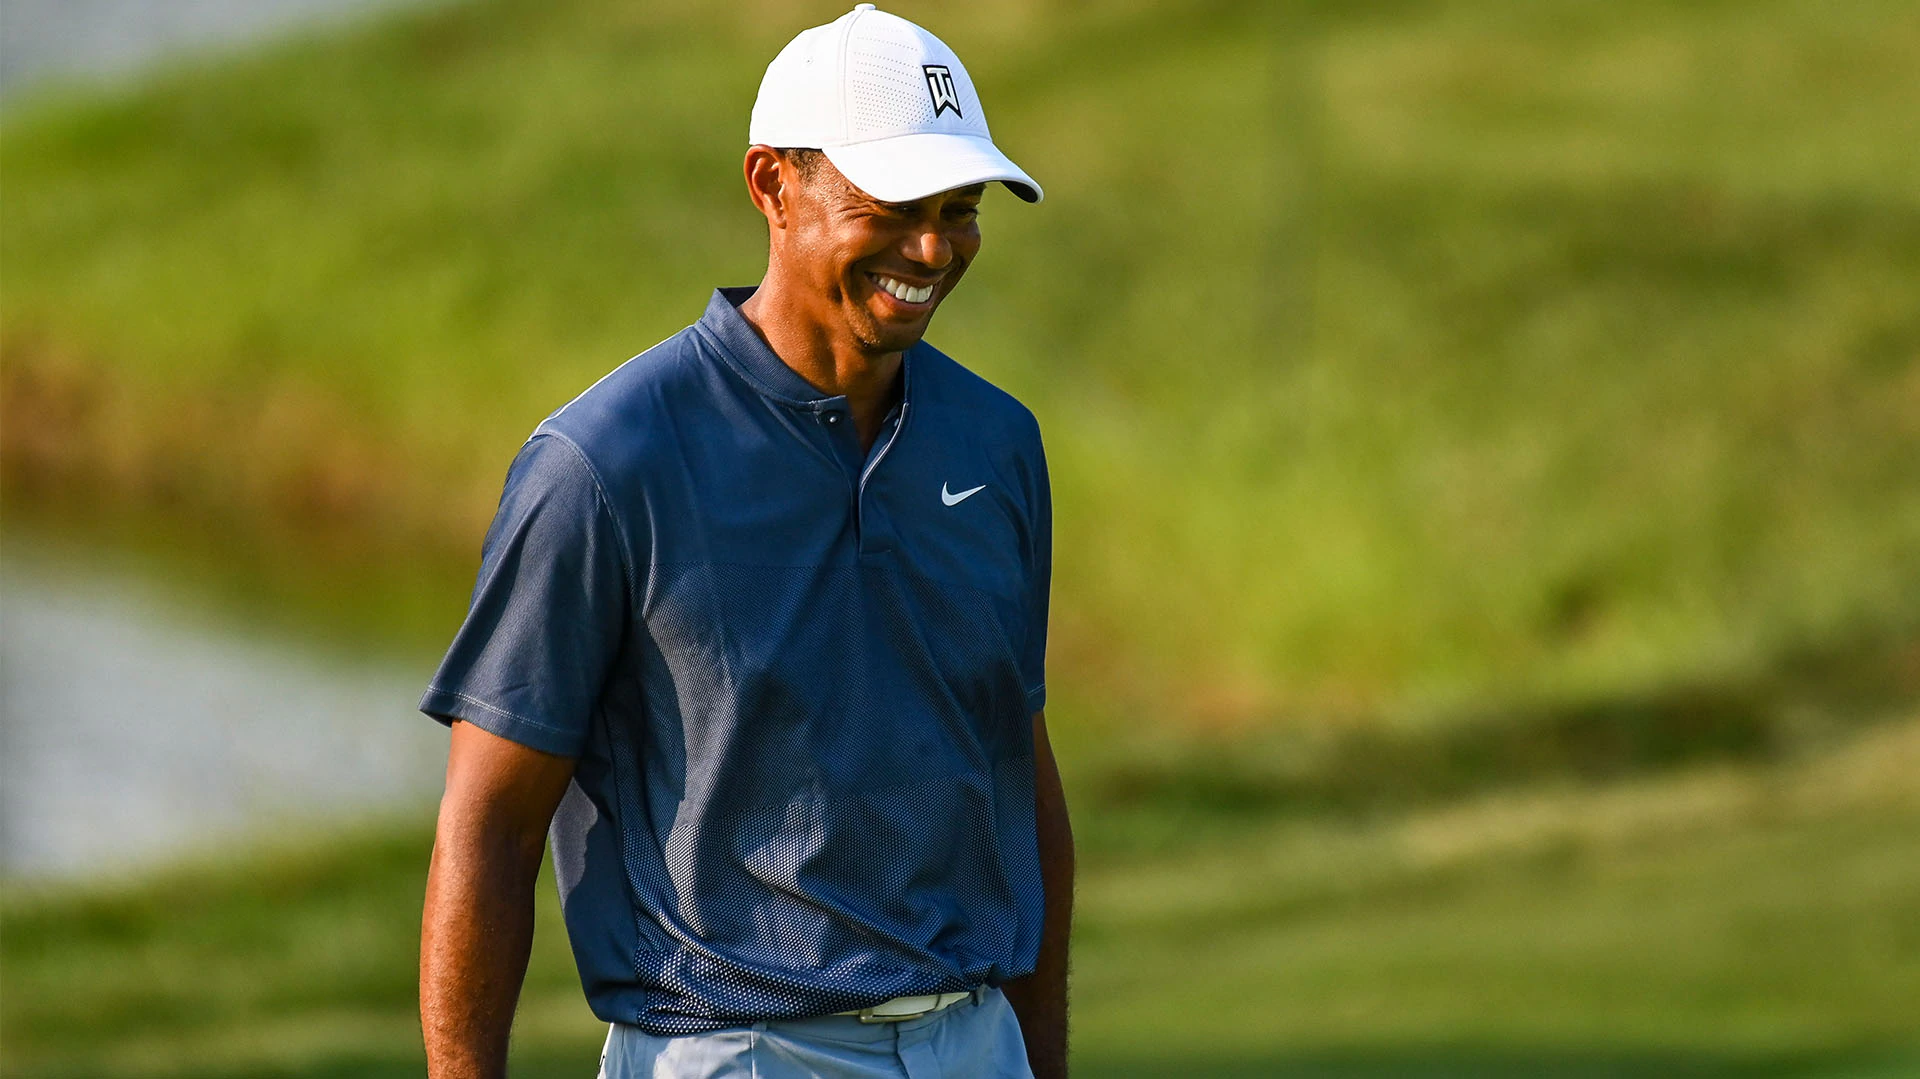 Tiger Woods: 2020 Masters Will be ‘Fun’ but ‘Very Different’ Experience